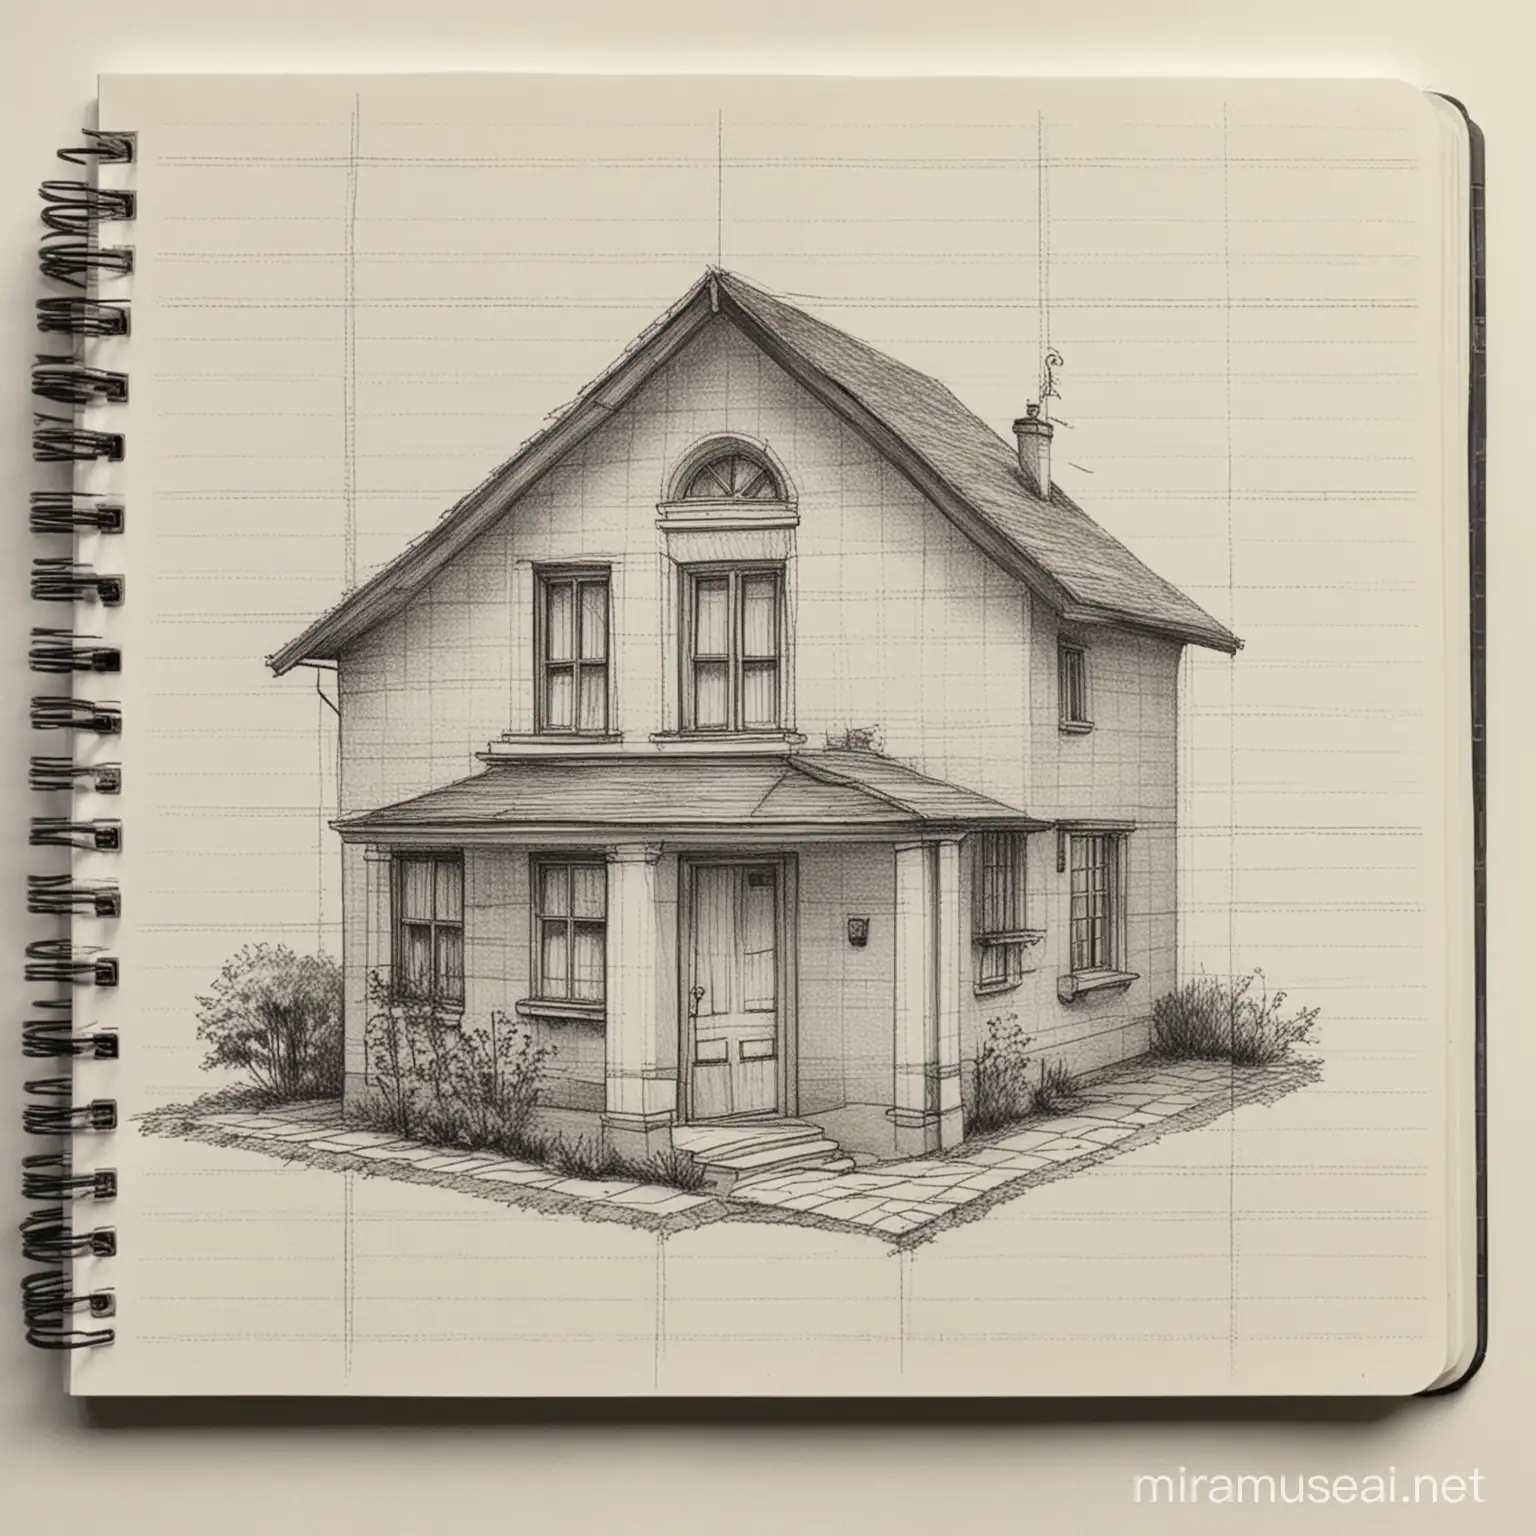 Grid Notebook Sketch of a Quaint House